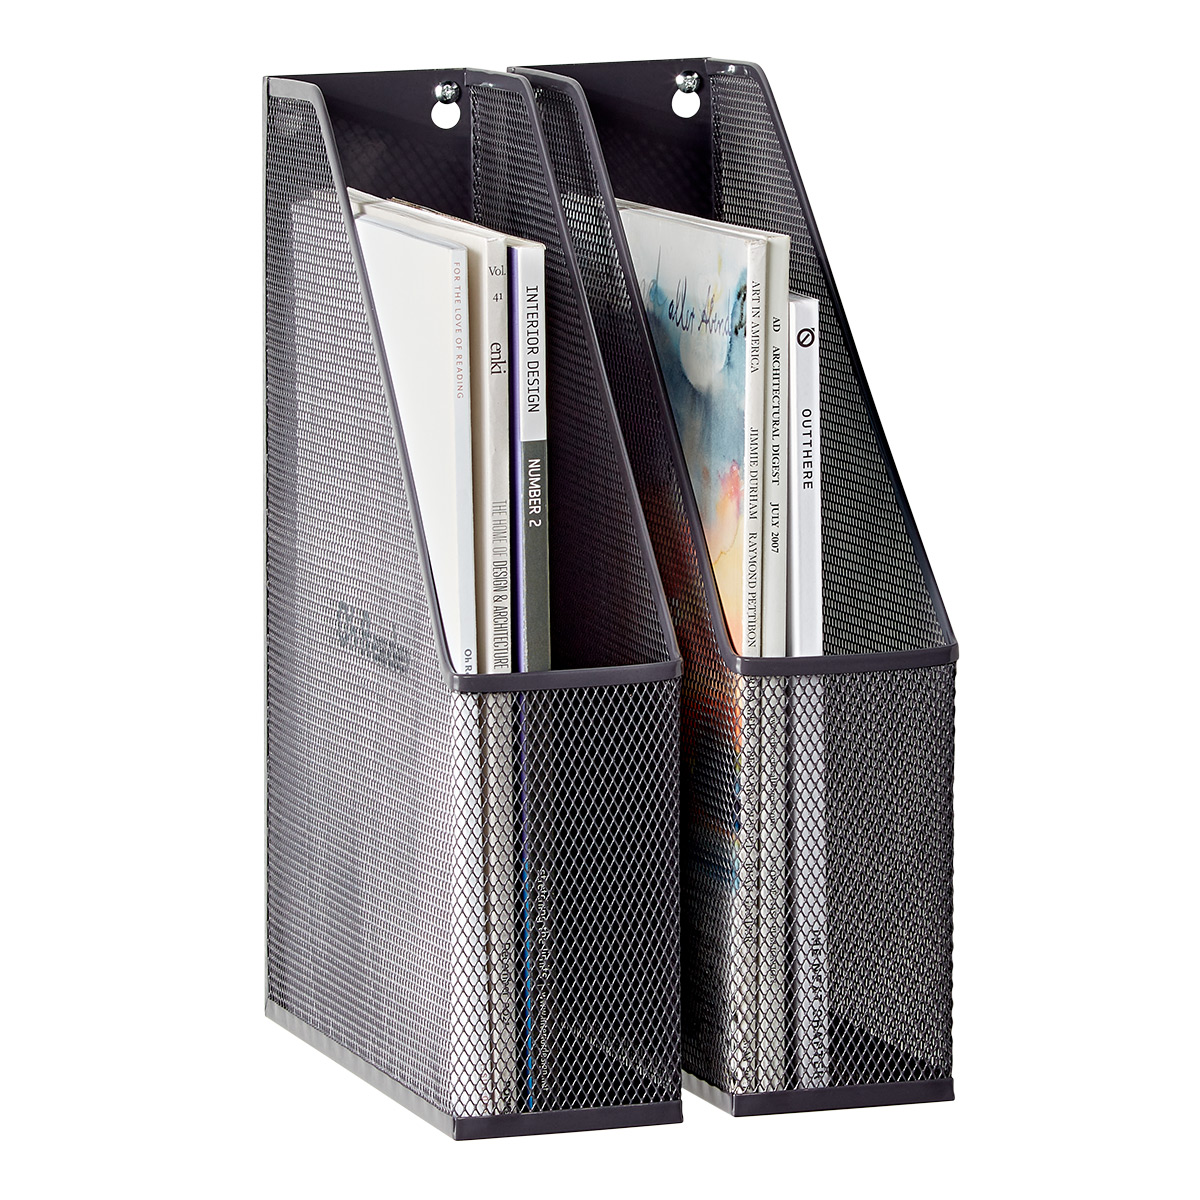 https://www.containerstore.com/catalogimages/463487/10088179_mesh_magazine_holder_graph.jpeg